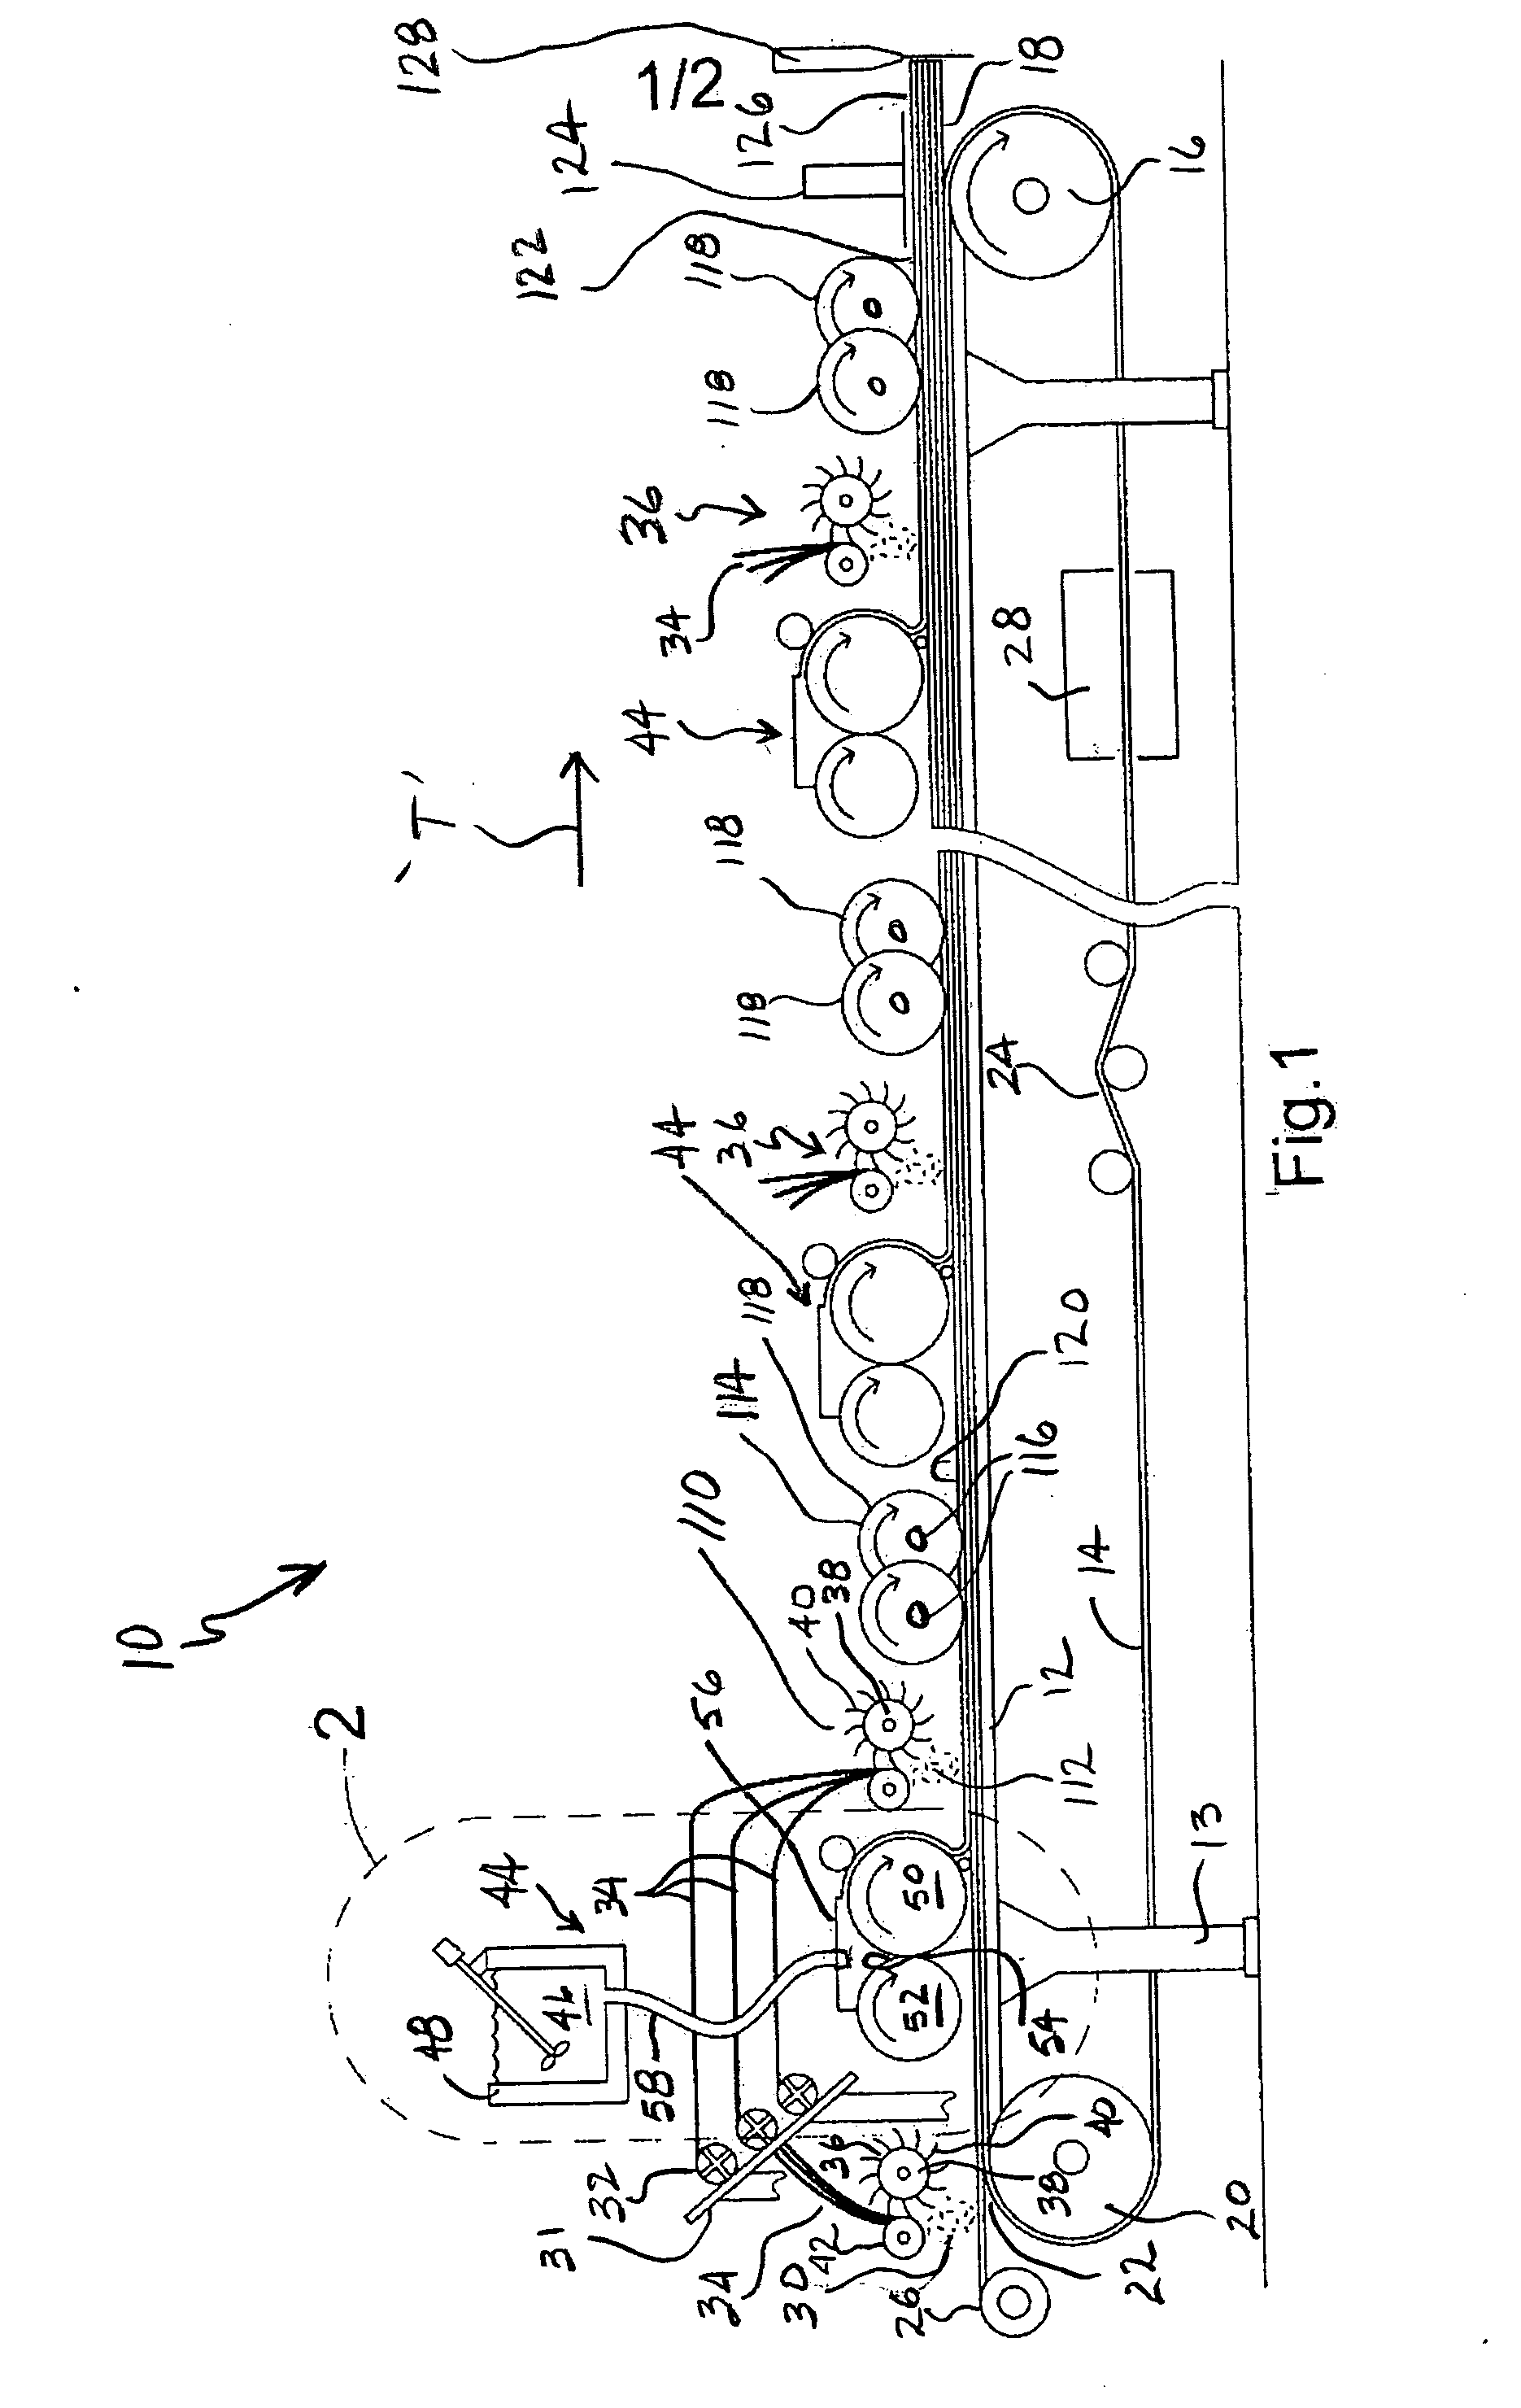 Slurry feed apparatus for fiber-reinforced structural cementitious panel production